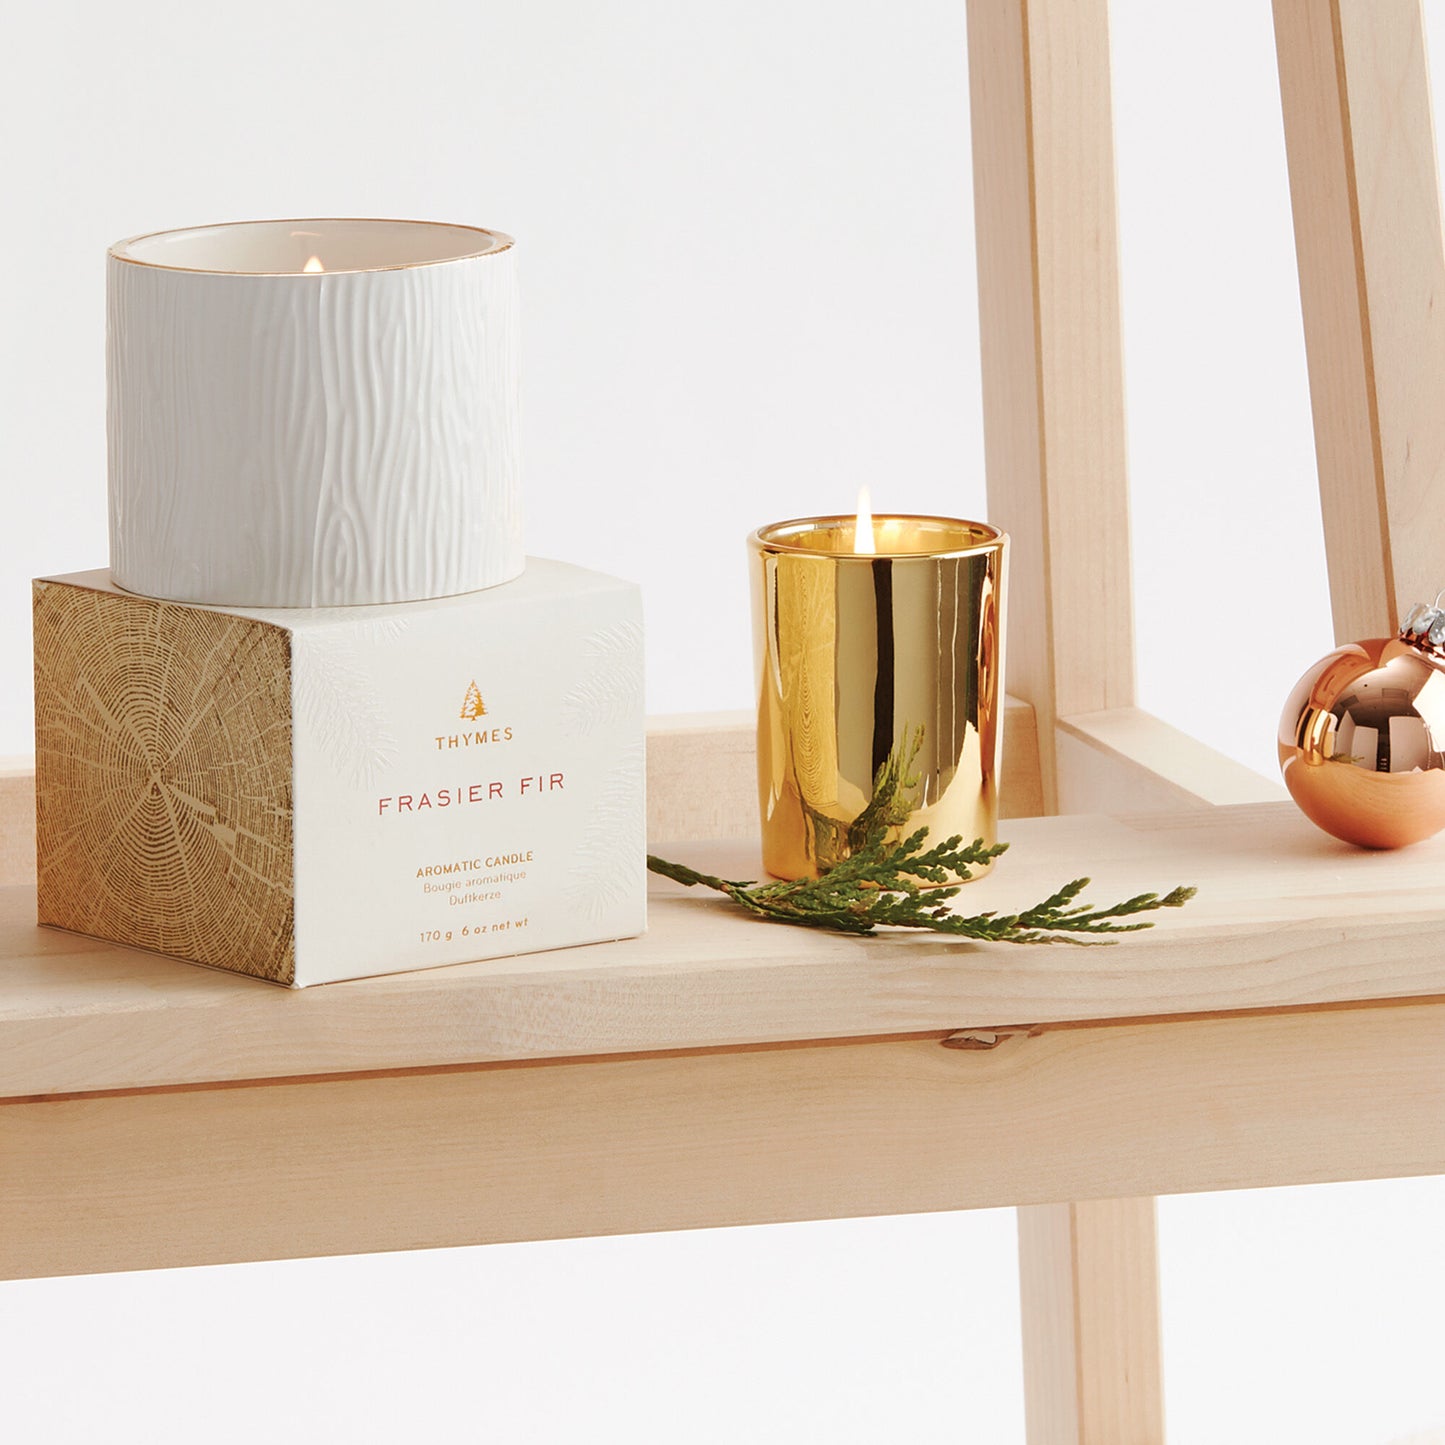 Thymes Frasier Fir Petite Ceramic Candle-Candles-Thymes-The Village Shoppe, Women’s Fashion Boutique, Shop Online and In Store - Located in Muscle Shoals, AL.